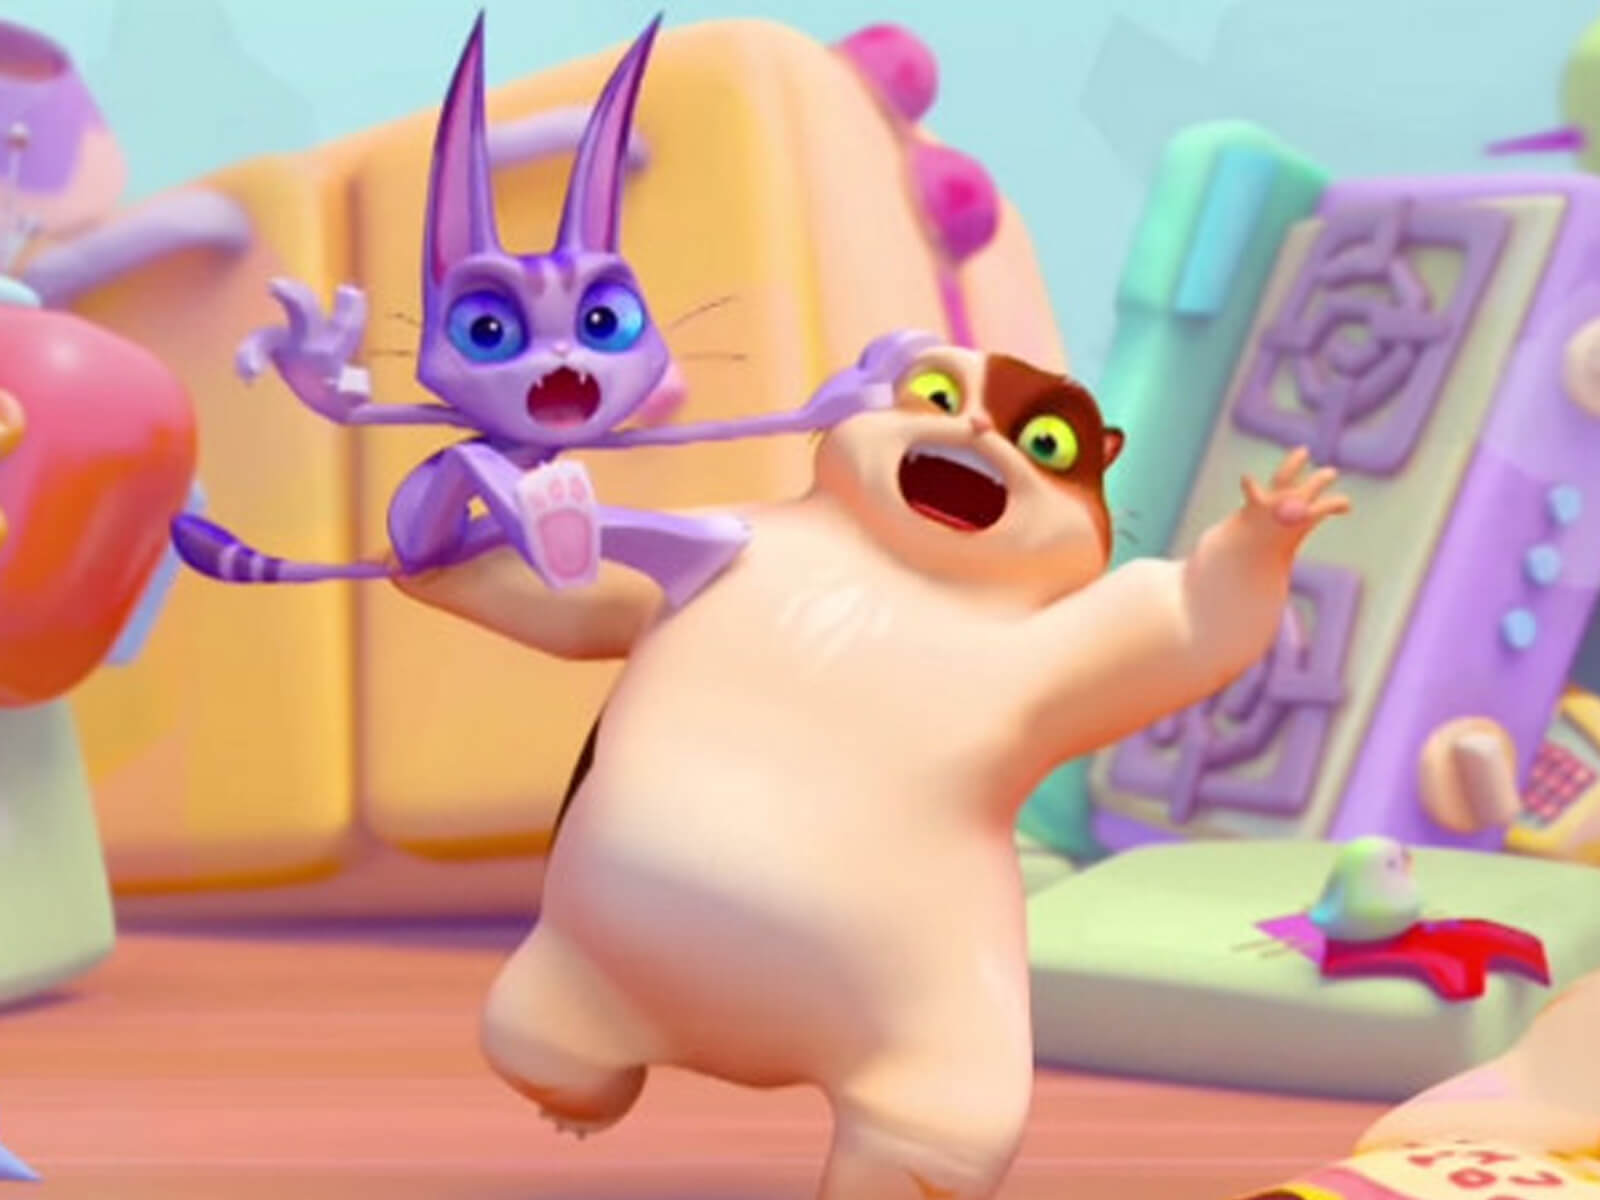 3D animated scene of a purple cat and beige cat surrounded by a child's colorful toys